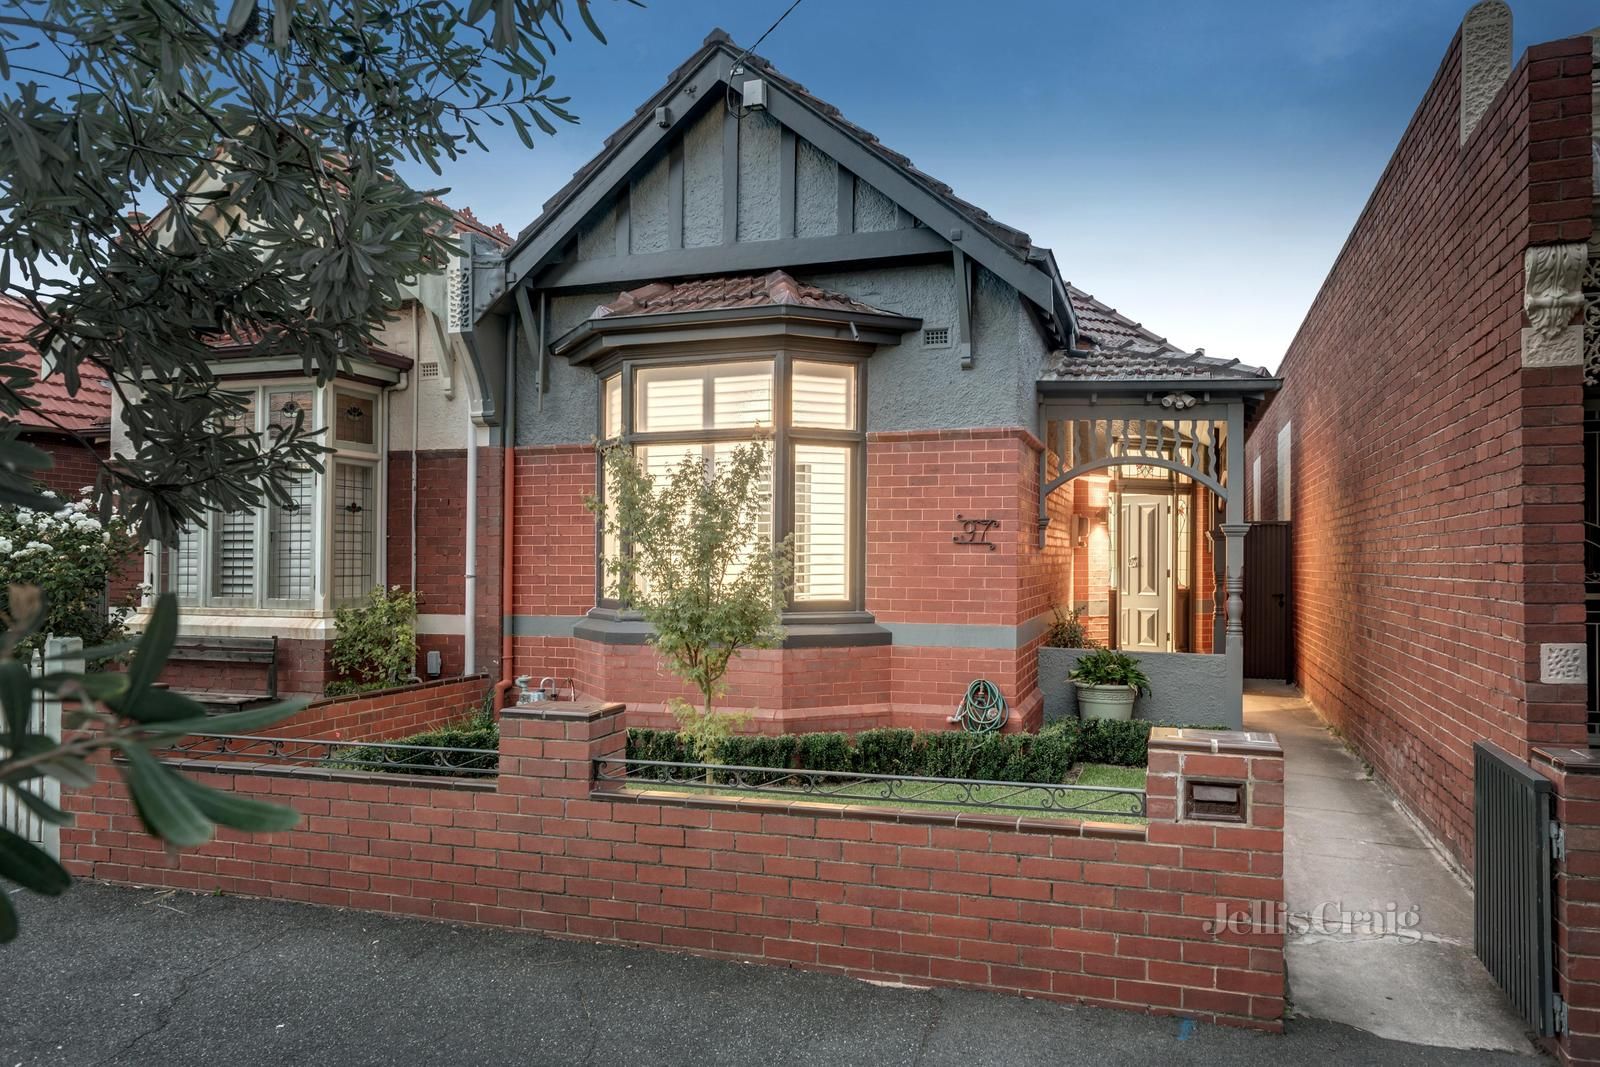 97 Wright Street, Middle Park | Property History & Address Research ...